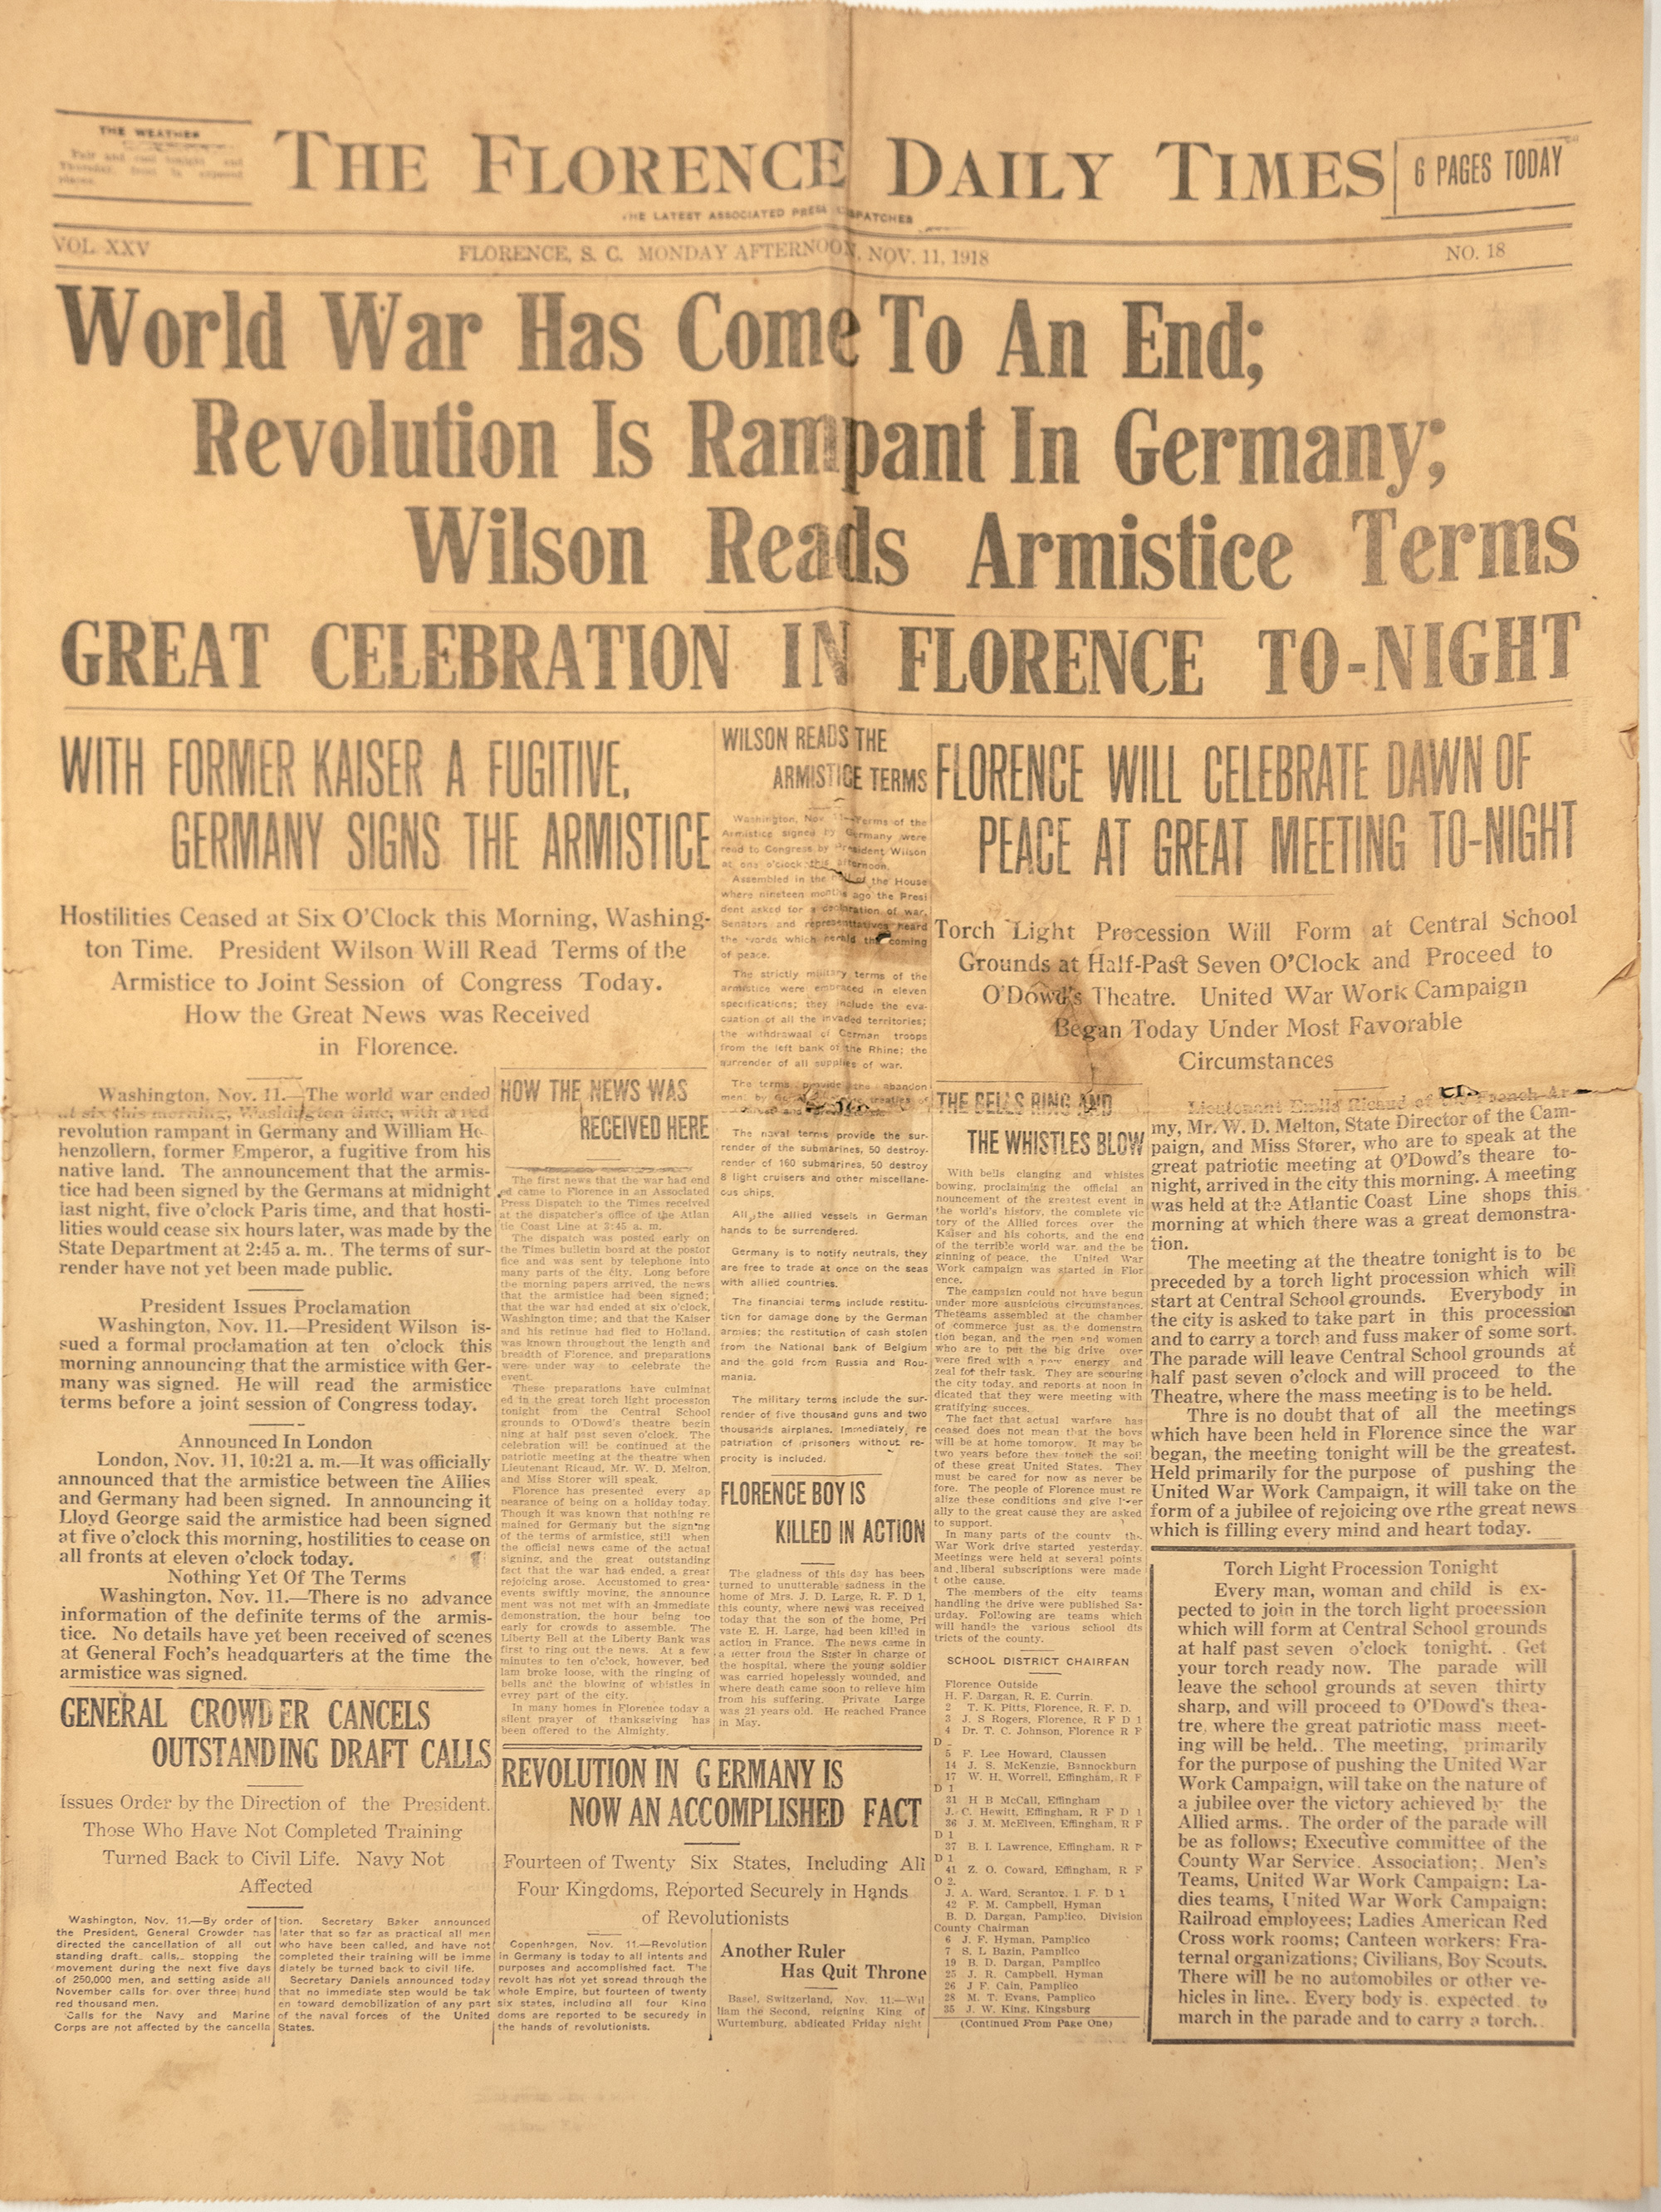 The Florence Daily Times - Nov 11, 1918 front page